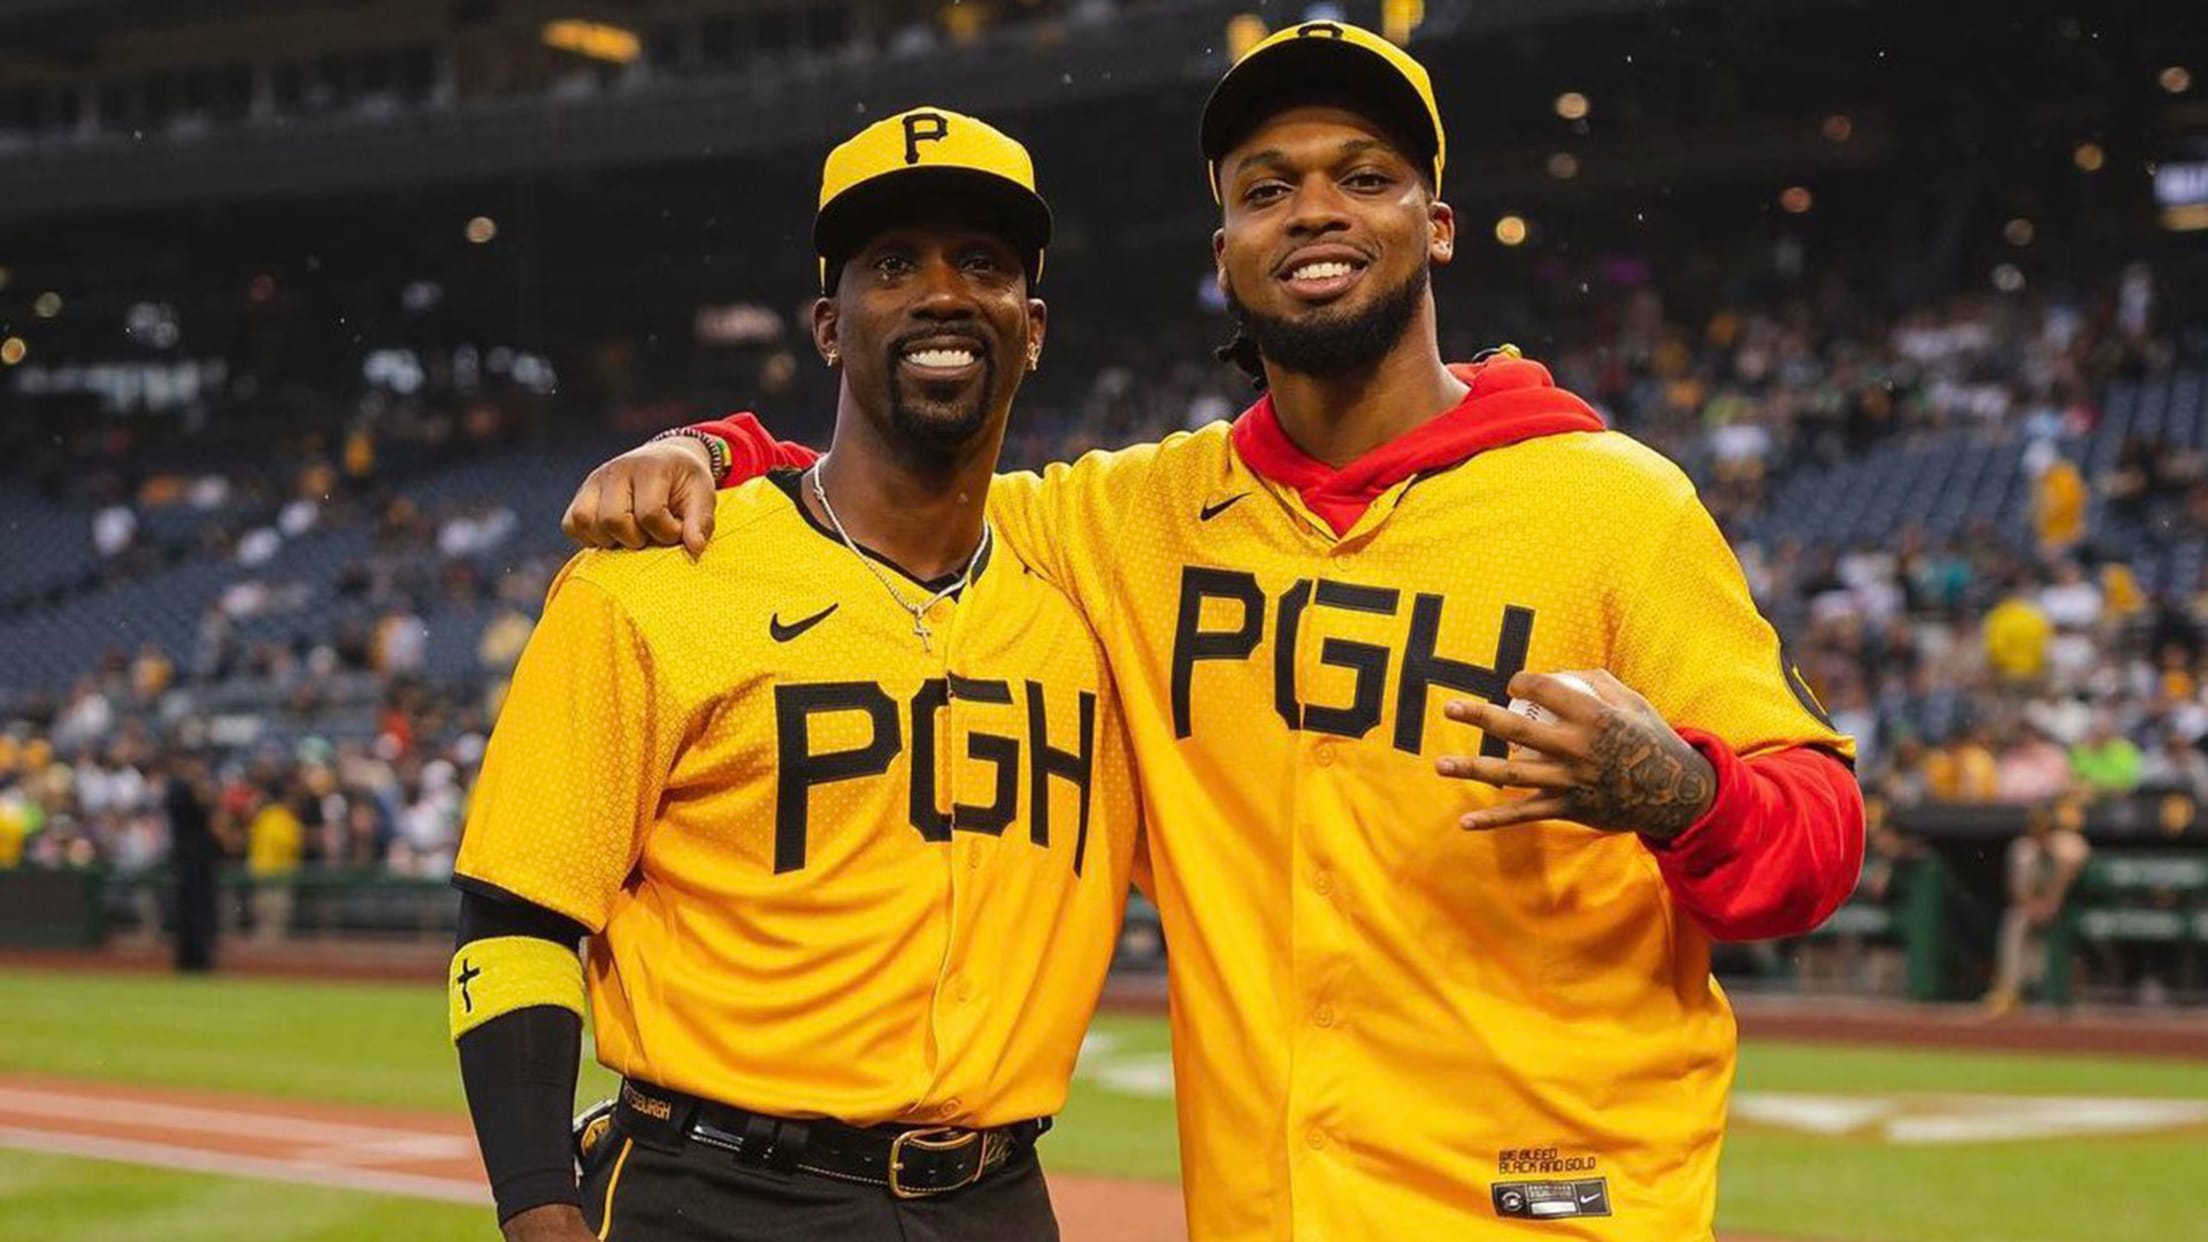 Andrew McCutchen and Damar Hamlin pose for a photo on the field